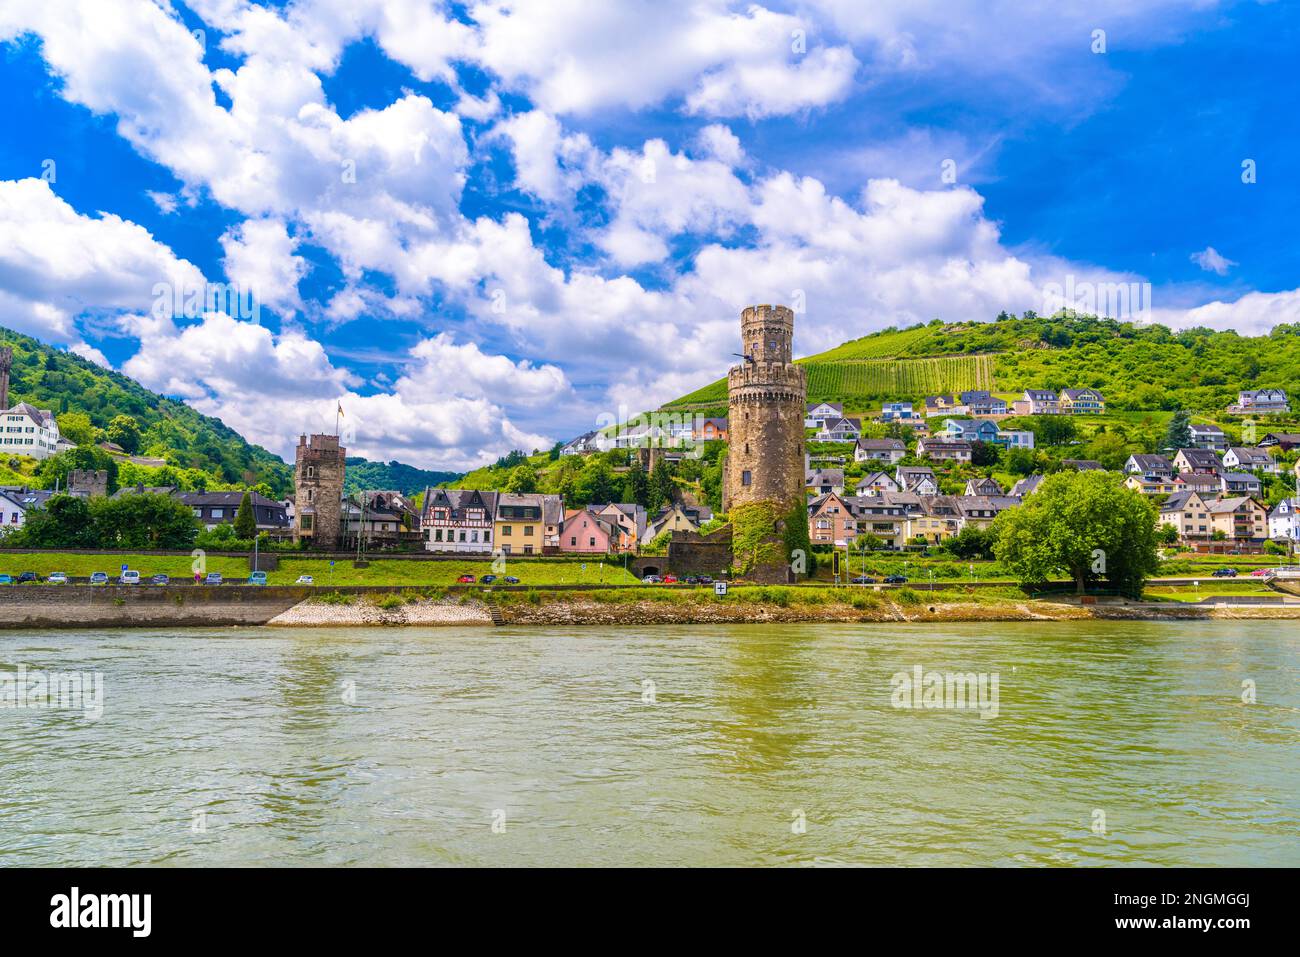 Defense Towers Of The Medieval Town Of Oberwesel In Rhine Valley, Germany  Stock Photo, Picture and Royalty Free Image. Image 85474711.